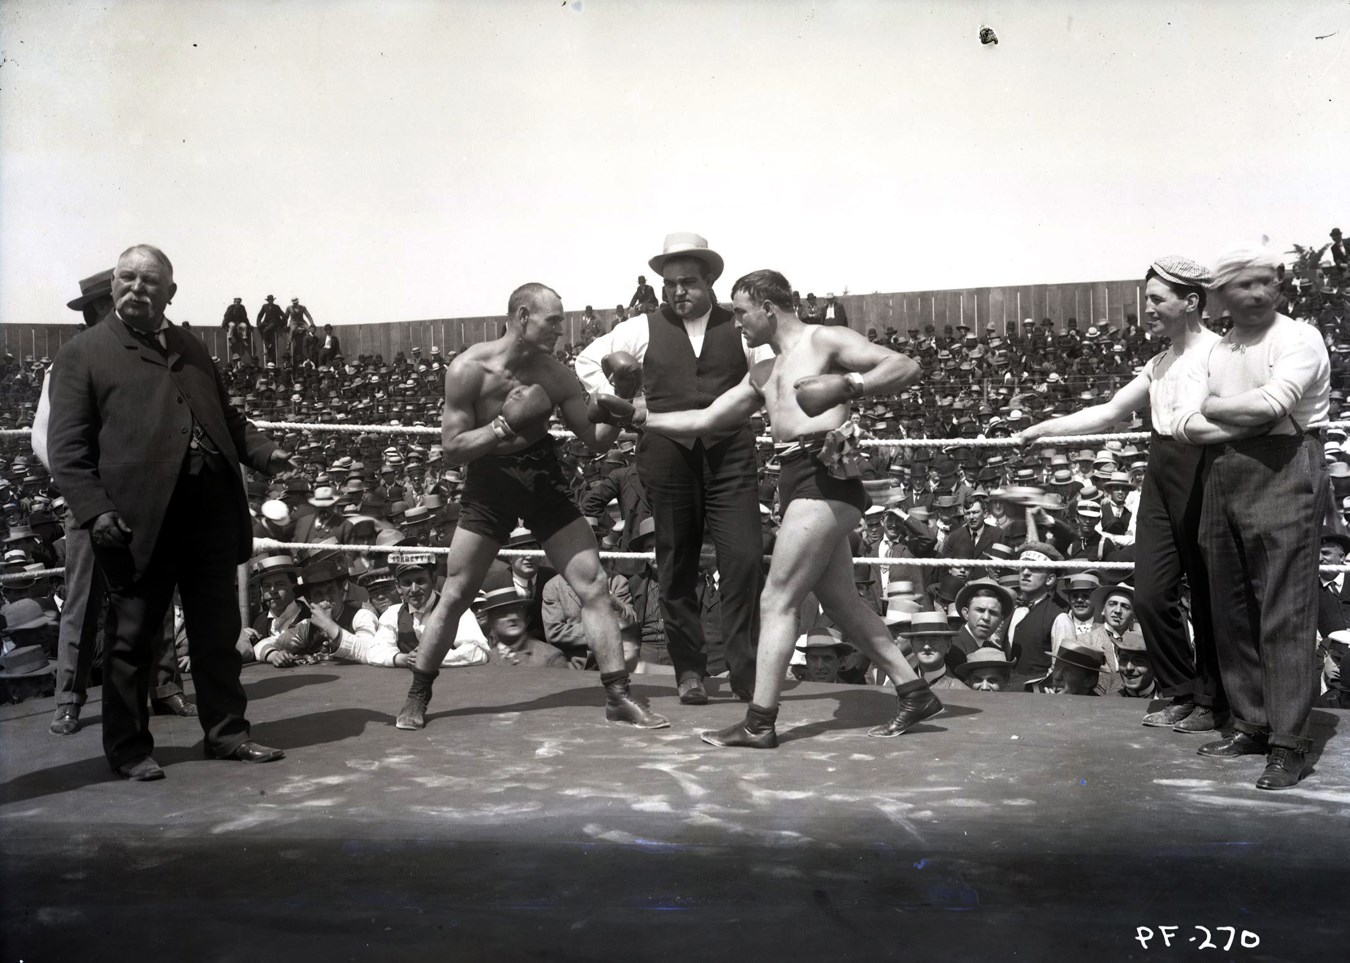 1907 Tommy Burns vs. Bill Squires Type I Glass Plate Negative by the Dana Studio